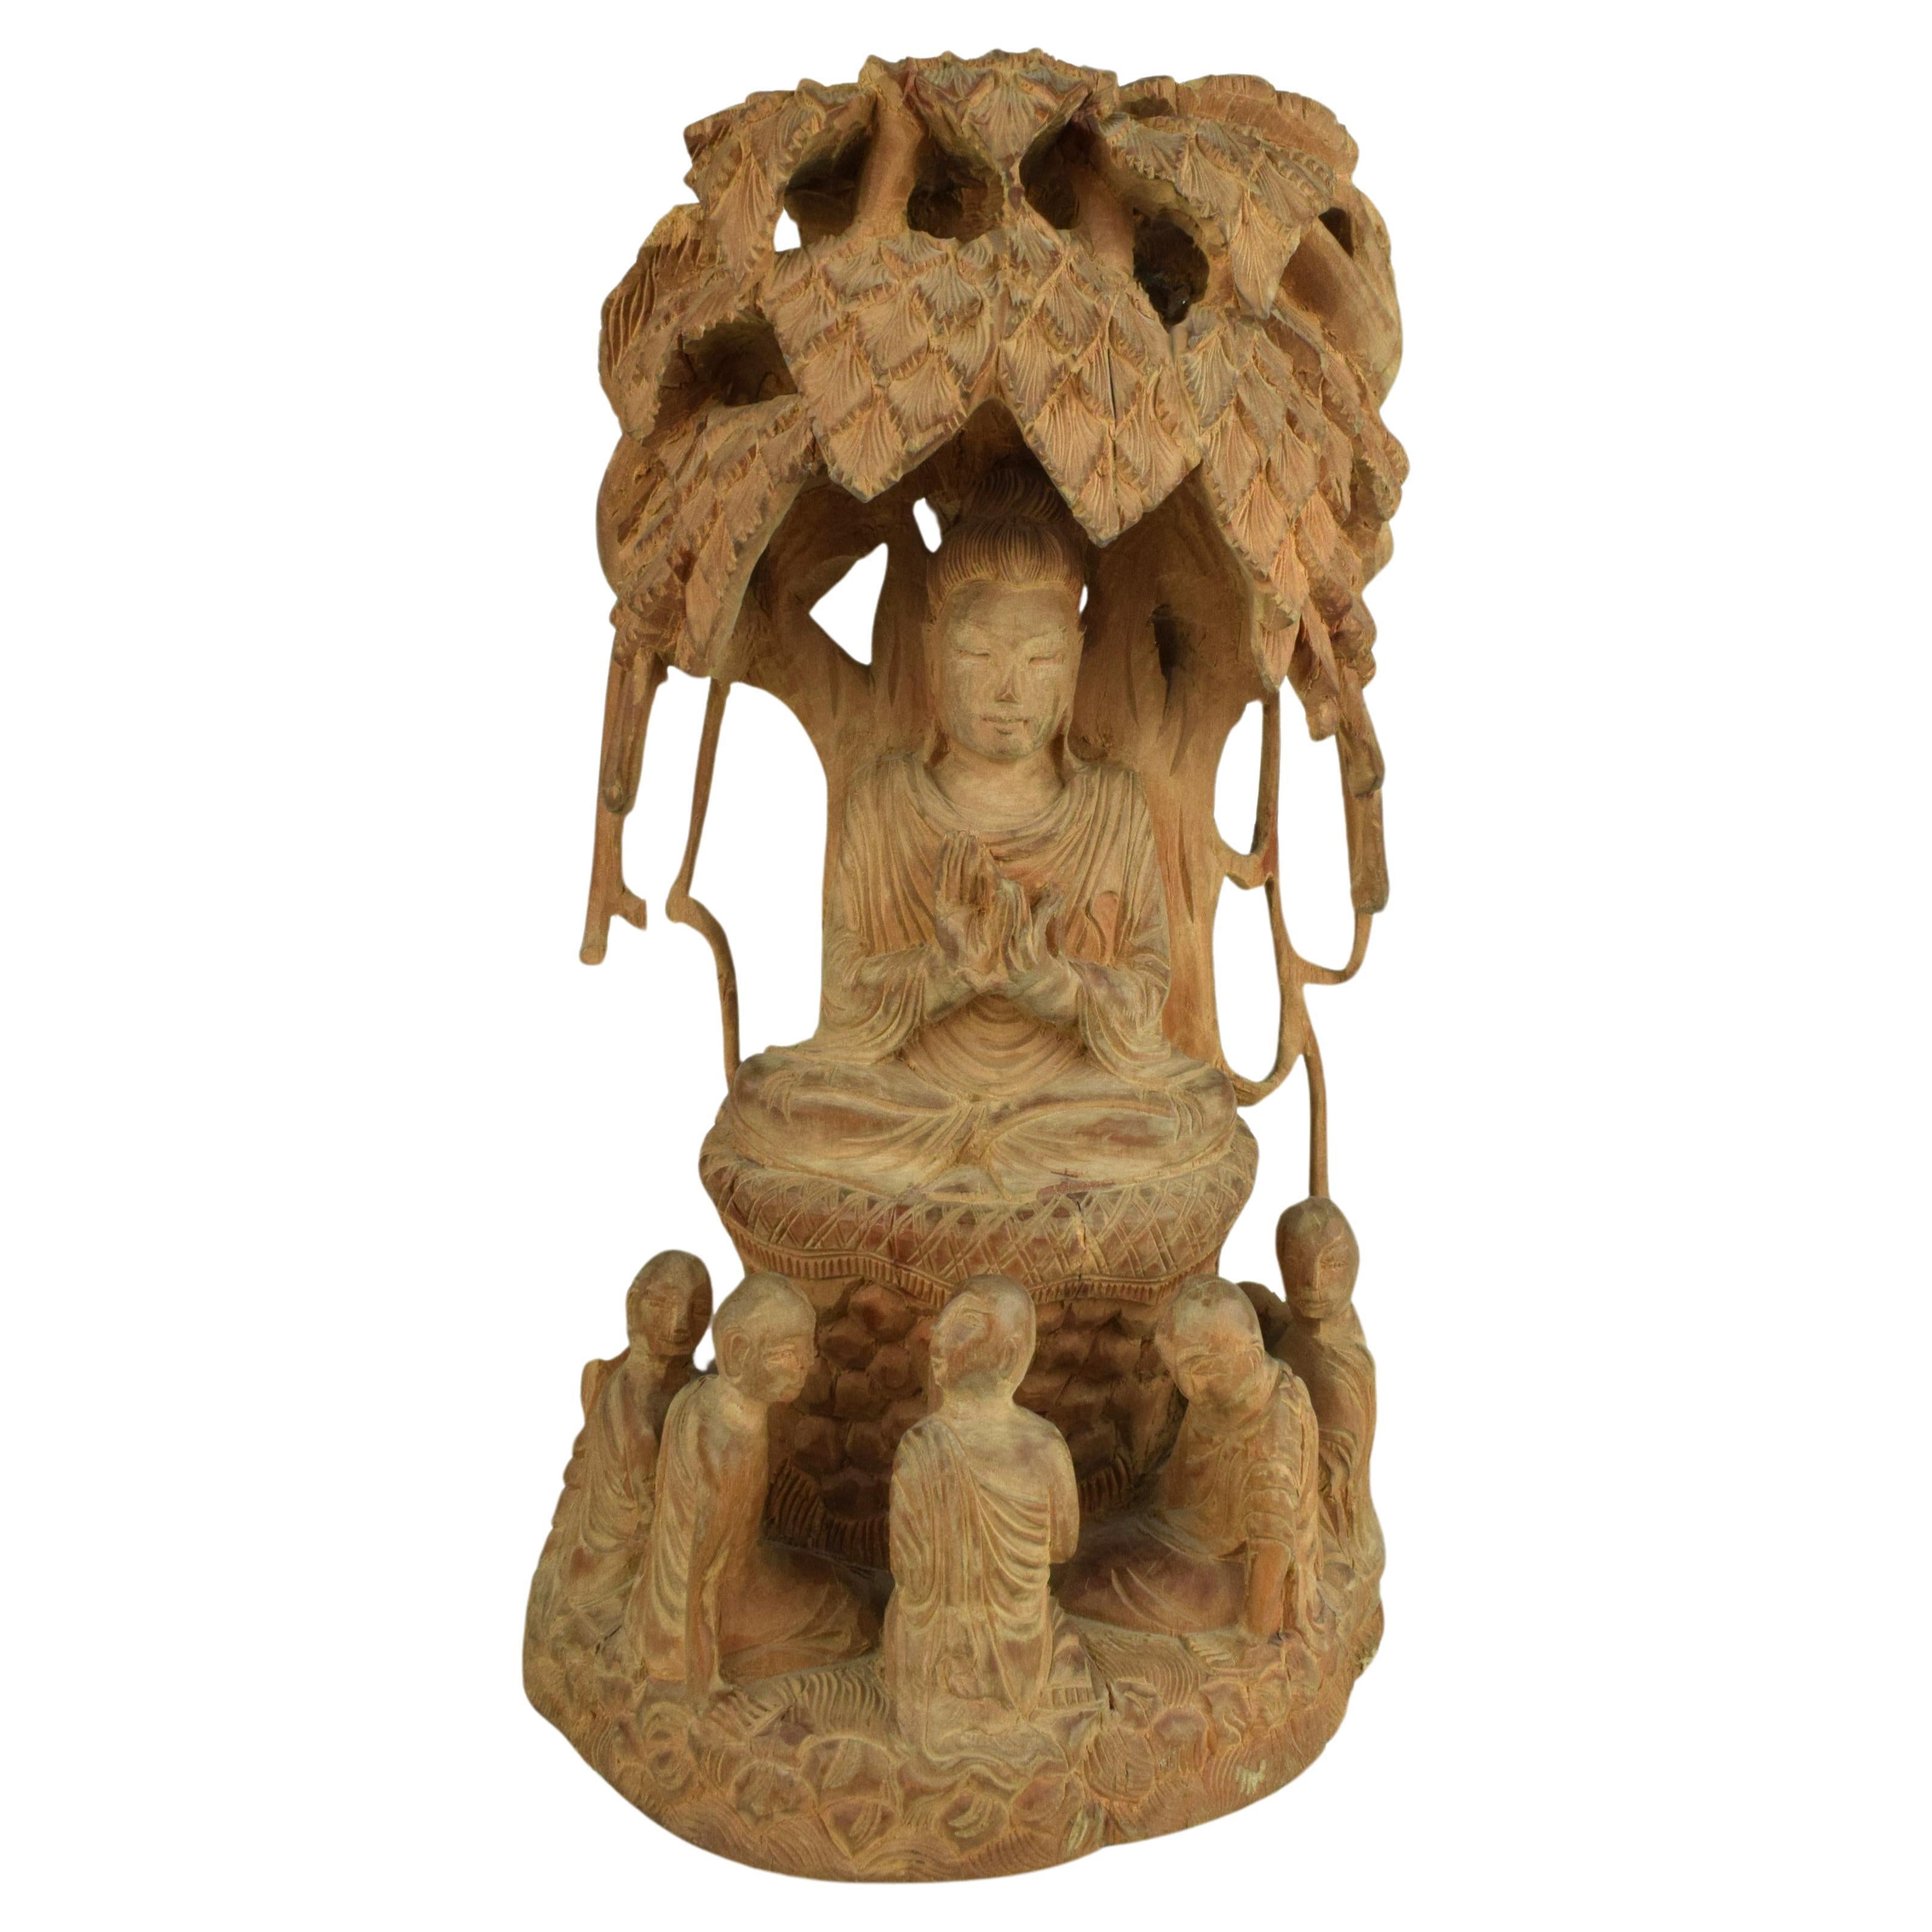 The sculpture, expertly carved from fragrant Nepalese sandalwood, stands as a testament to the rich tradition of wood carving in Nepal. The medium itself adds a sensory dimension to the artwork, with the subtle, natural aroma of sandalwood enhancing